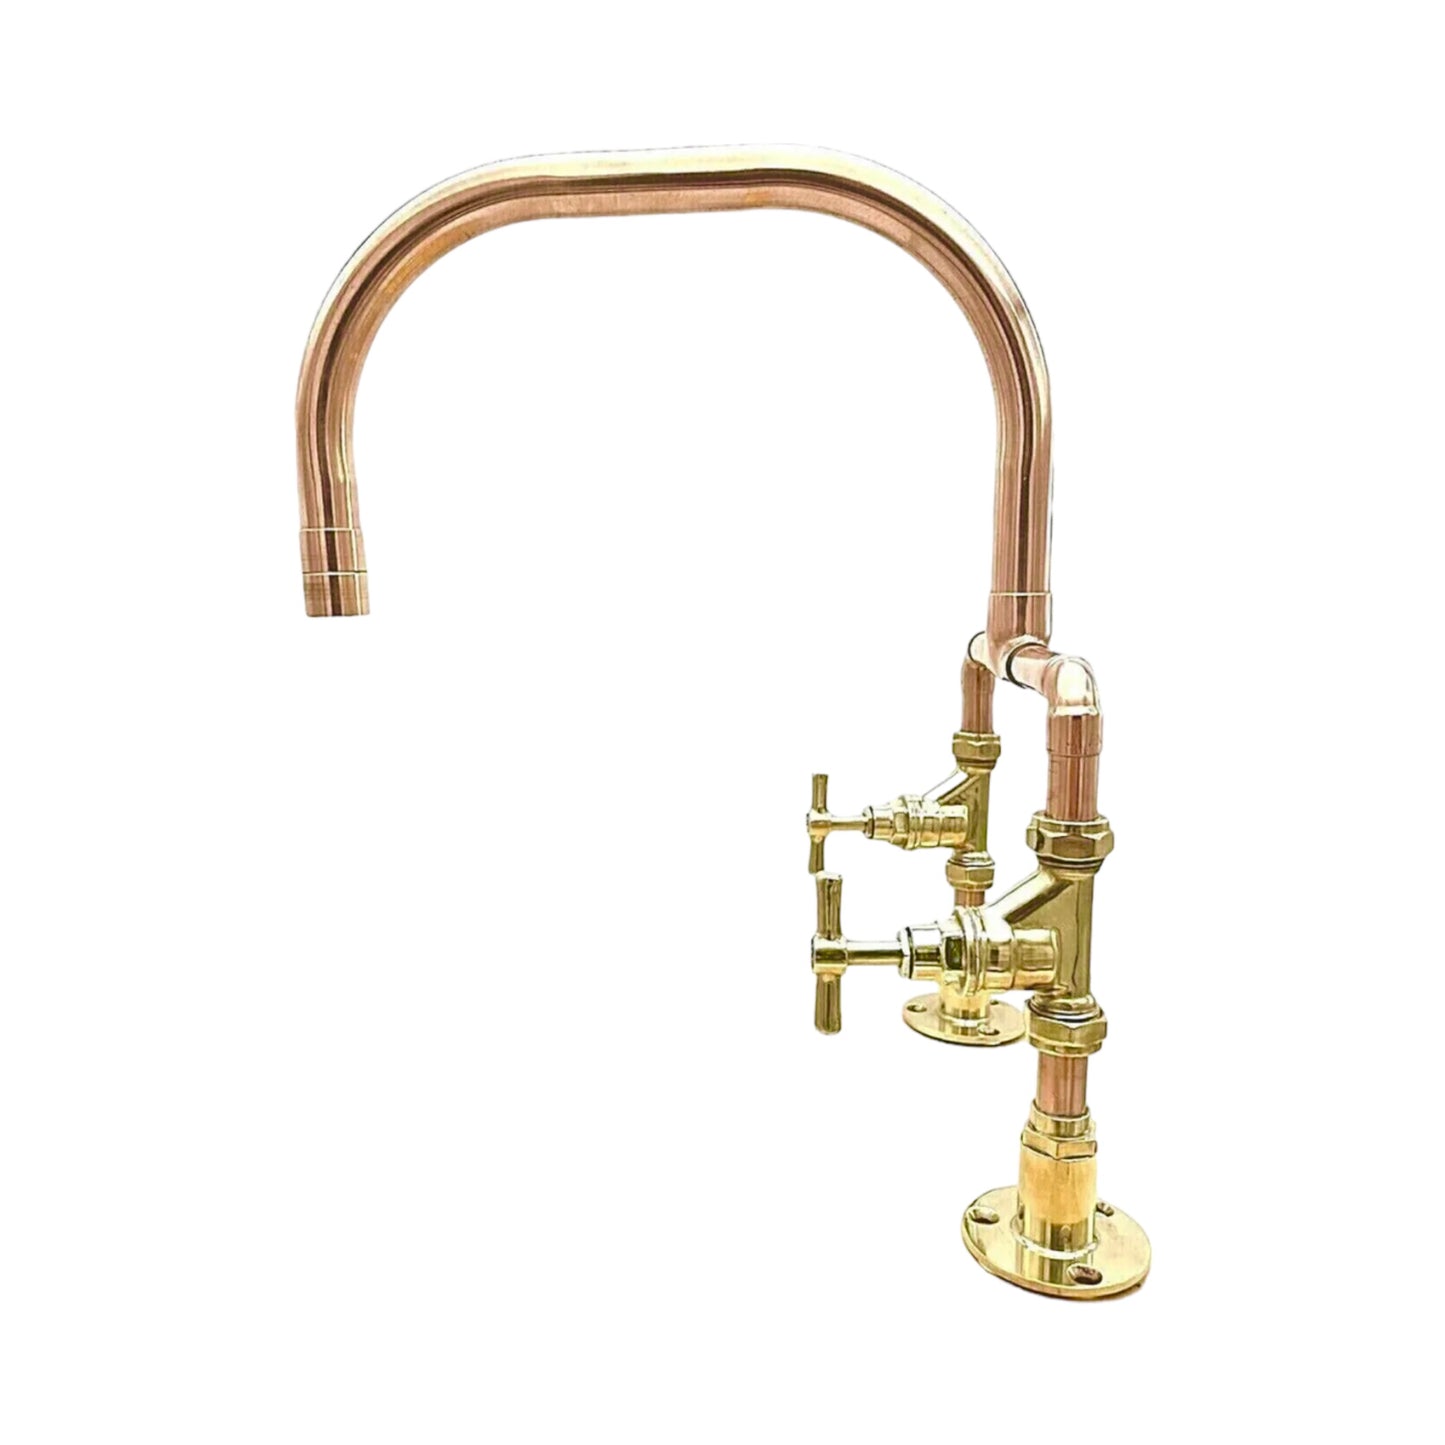 Copper and brass mixer tap set sold by All Things French Store